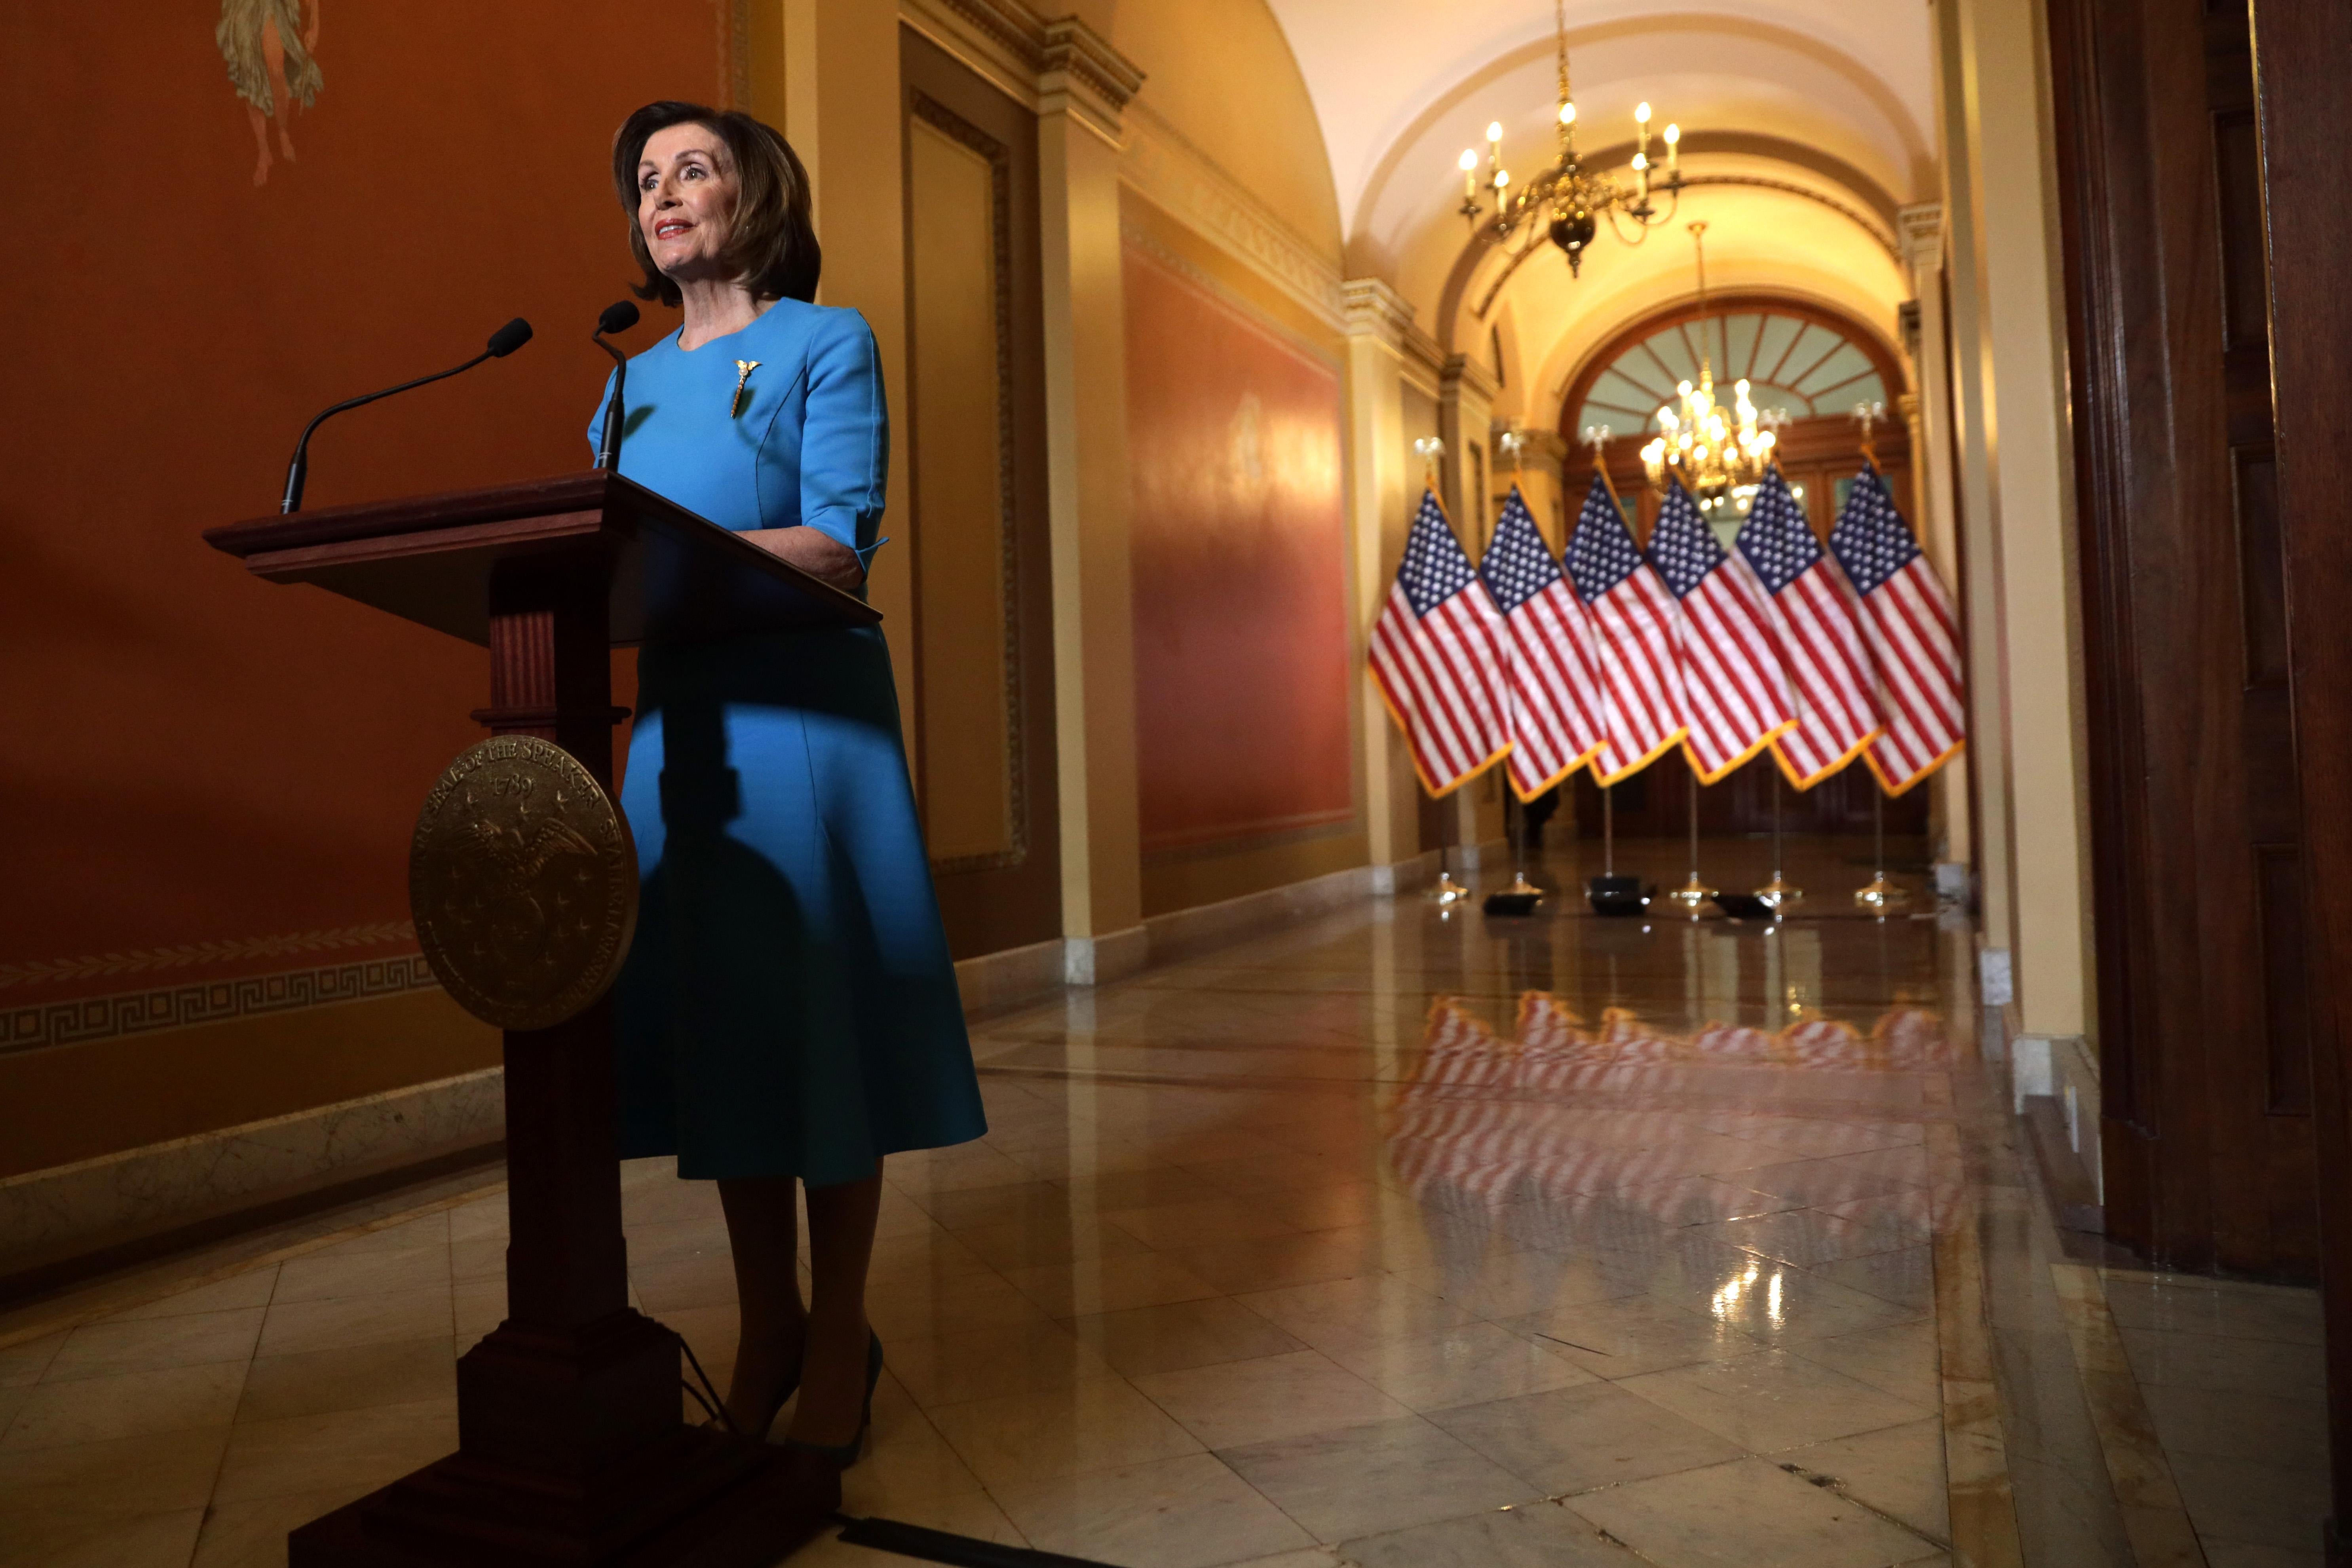 Nancy Pelsoi stands at a podium in a marble-floored hall with American flags in the background.